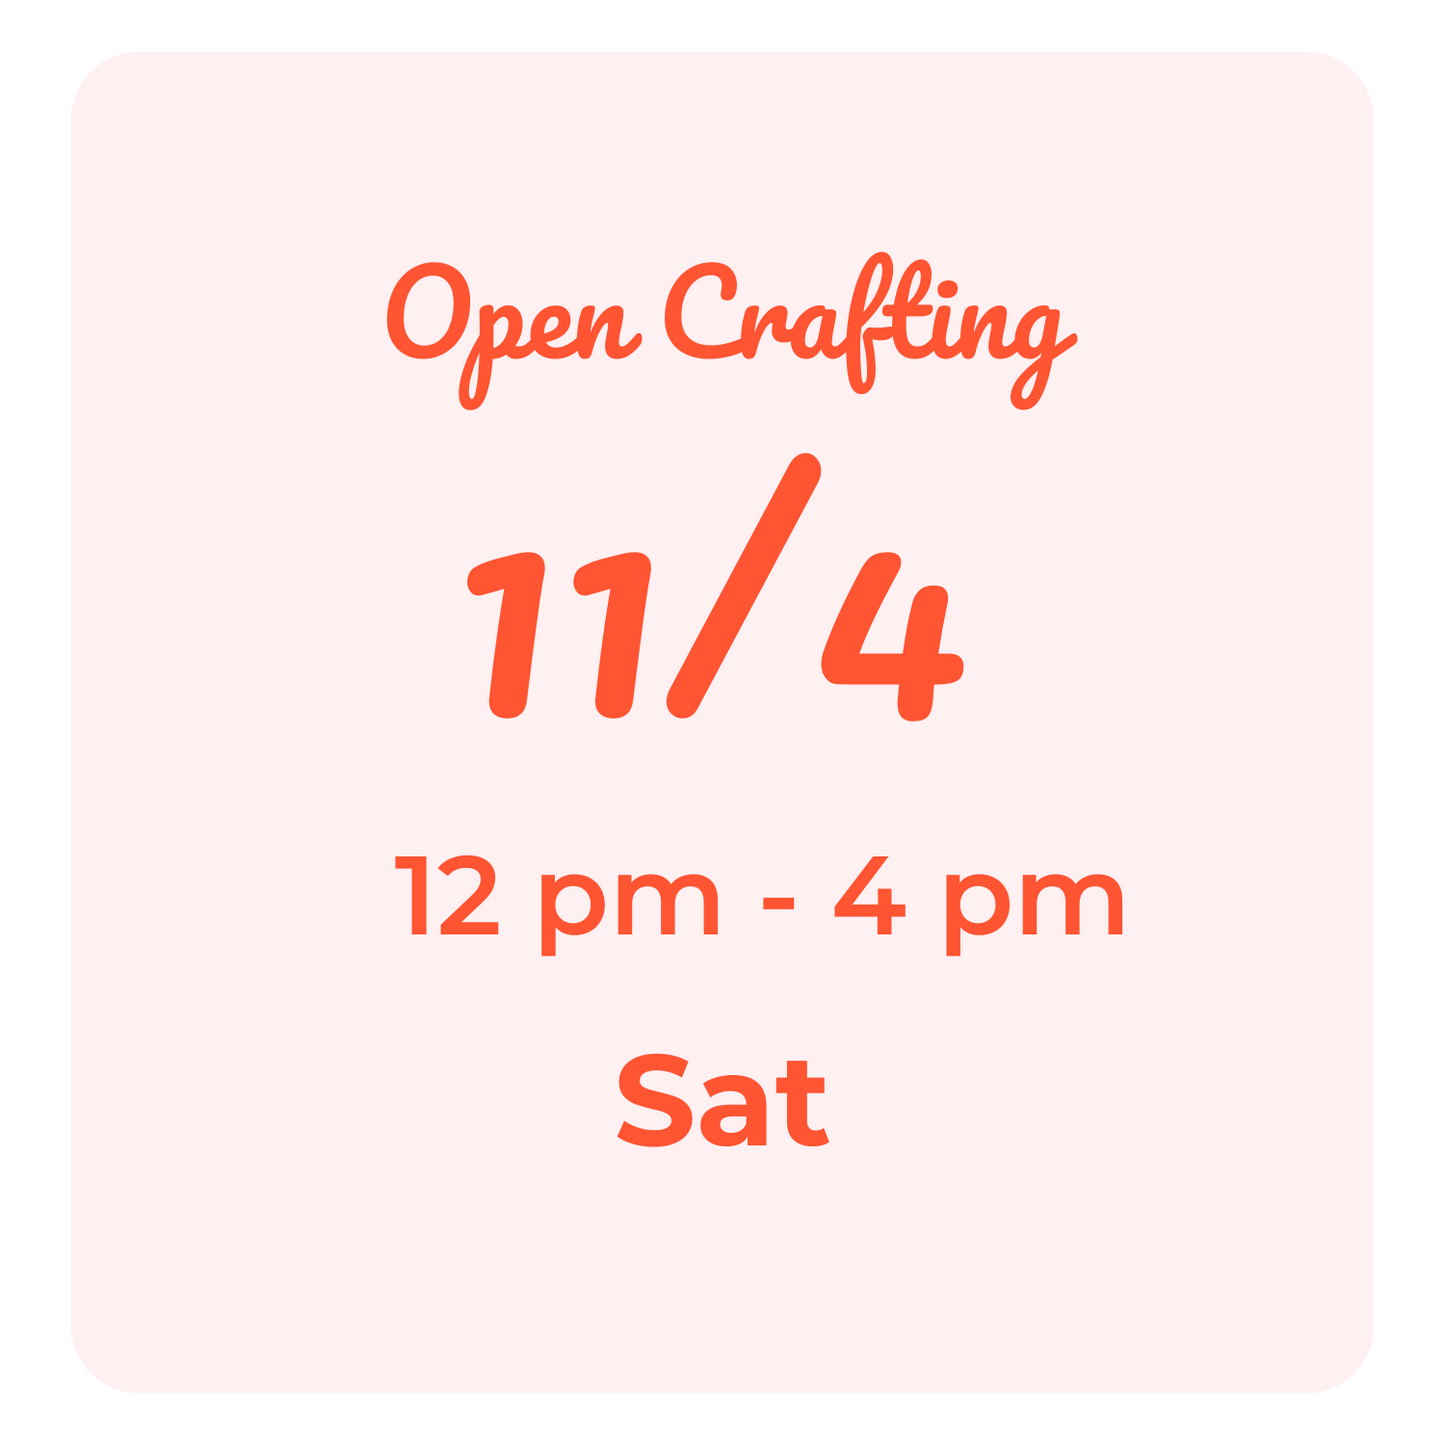 Open Crafting Hours: Saturdays